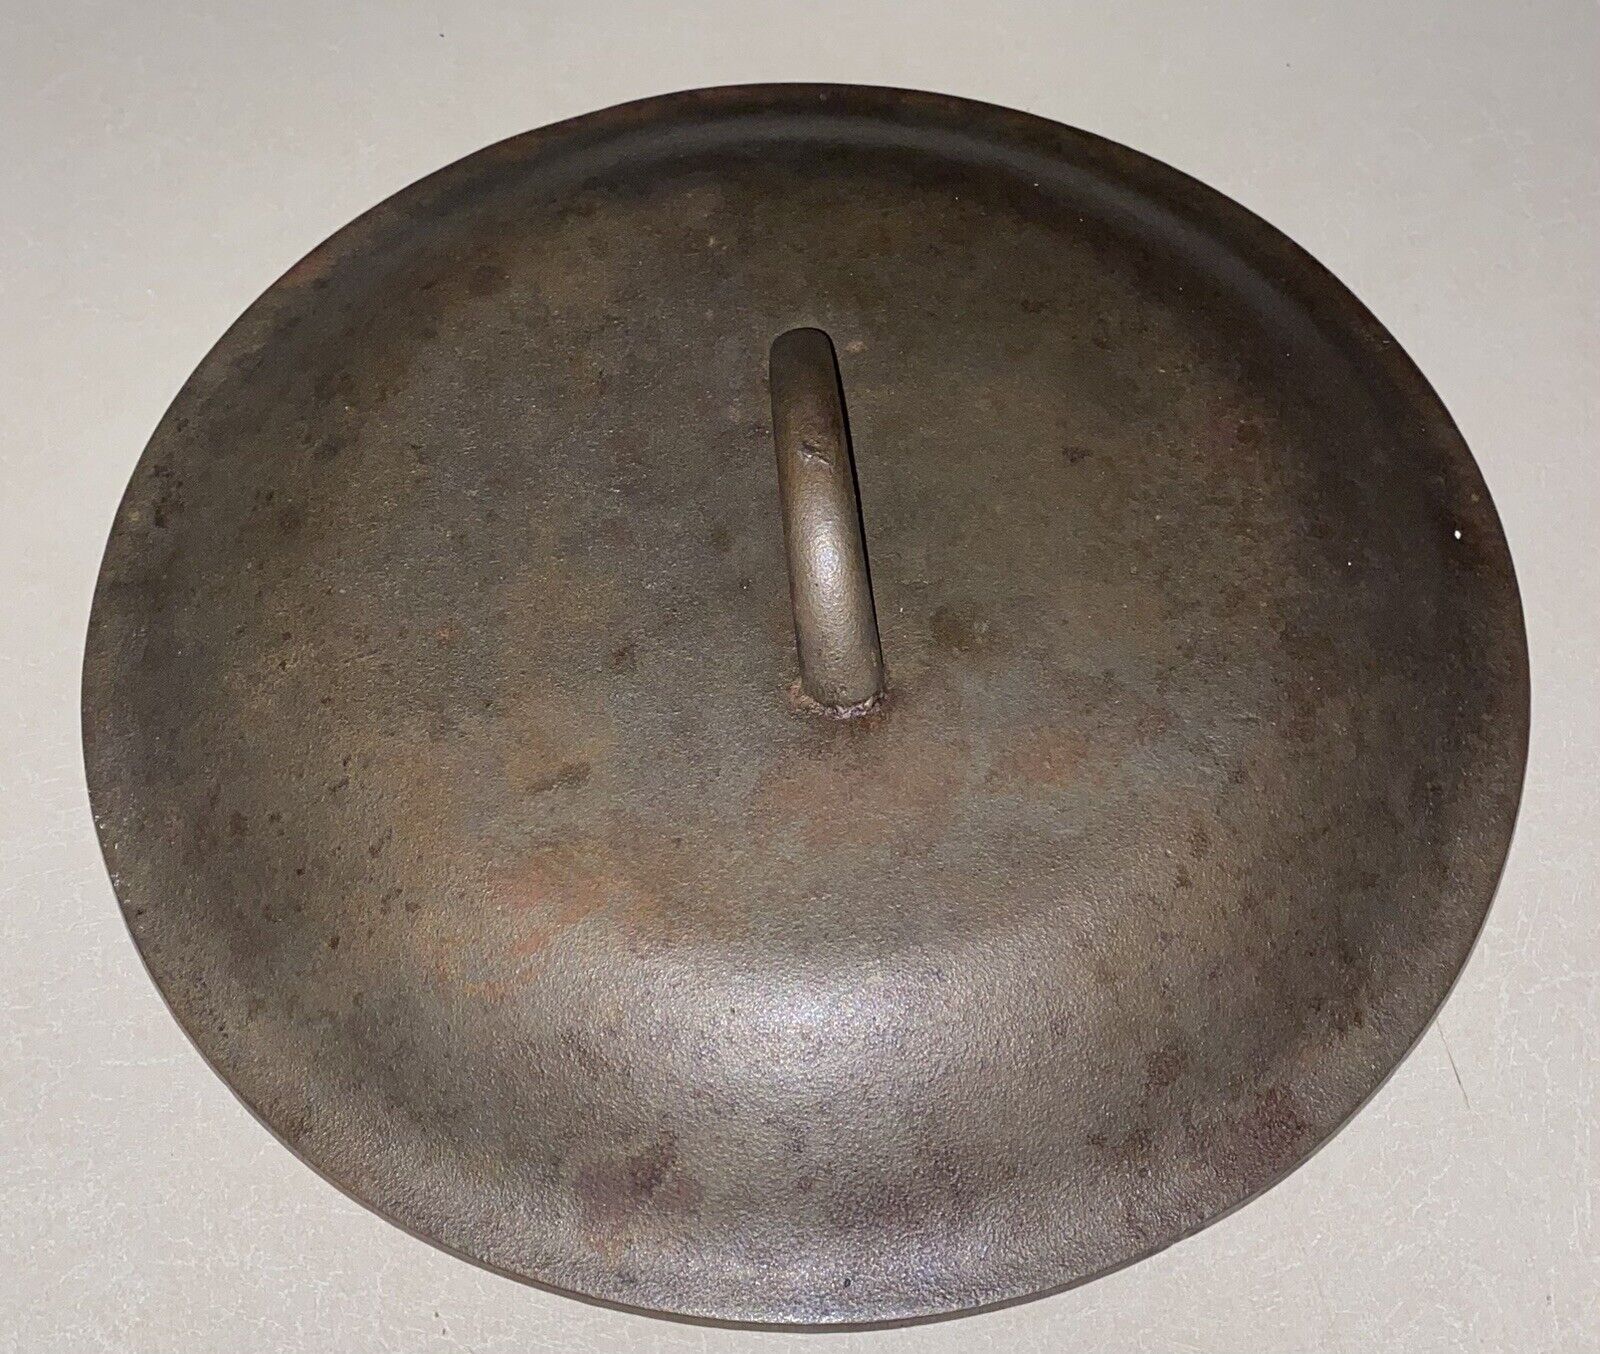 Antique Cast Iron Dutch Oven Lid Marked 6 LO99 With Dimples; Lid Only